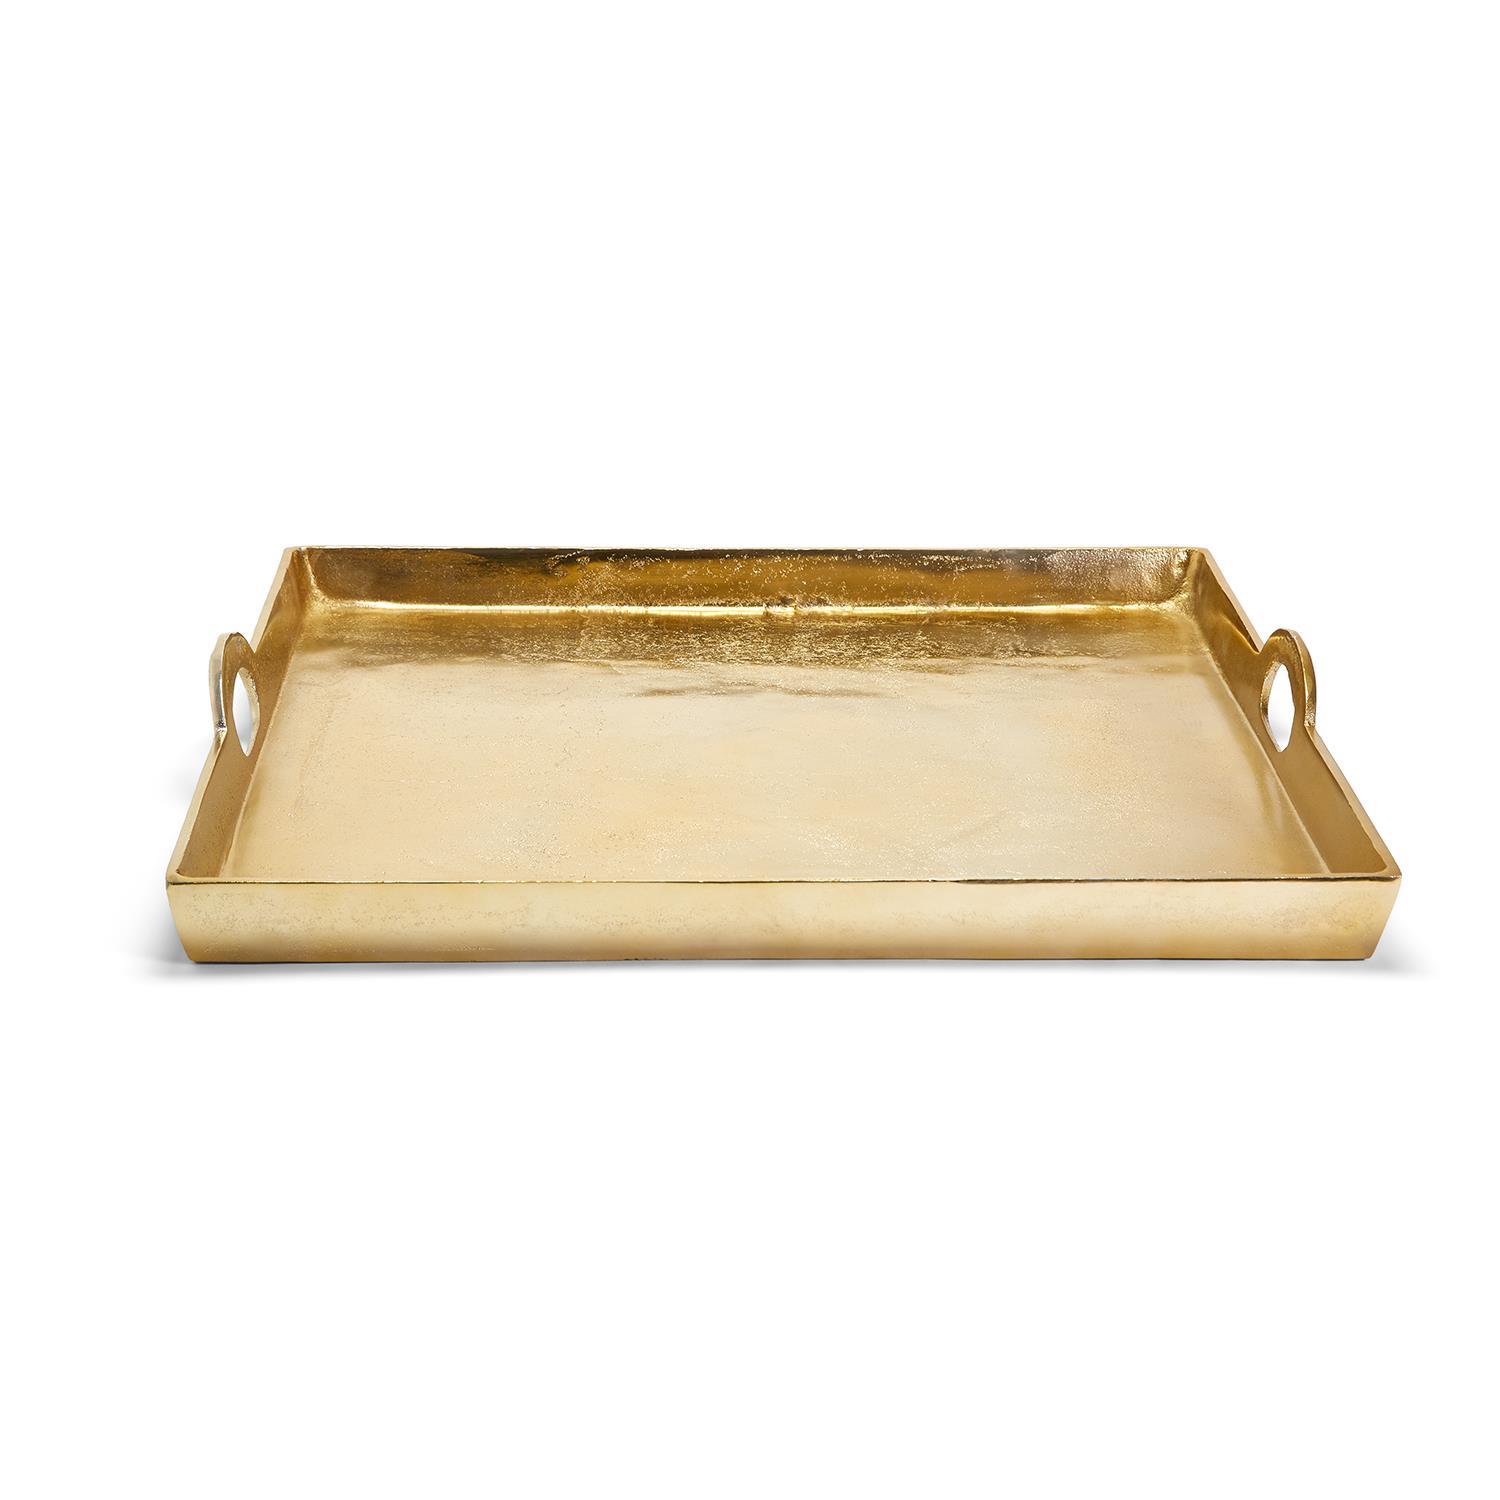 Two's Company Gold Hotel De Ville Decorative Square Tray Recycled Aluminum